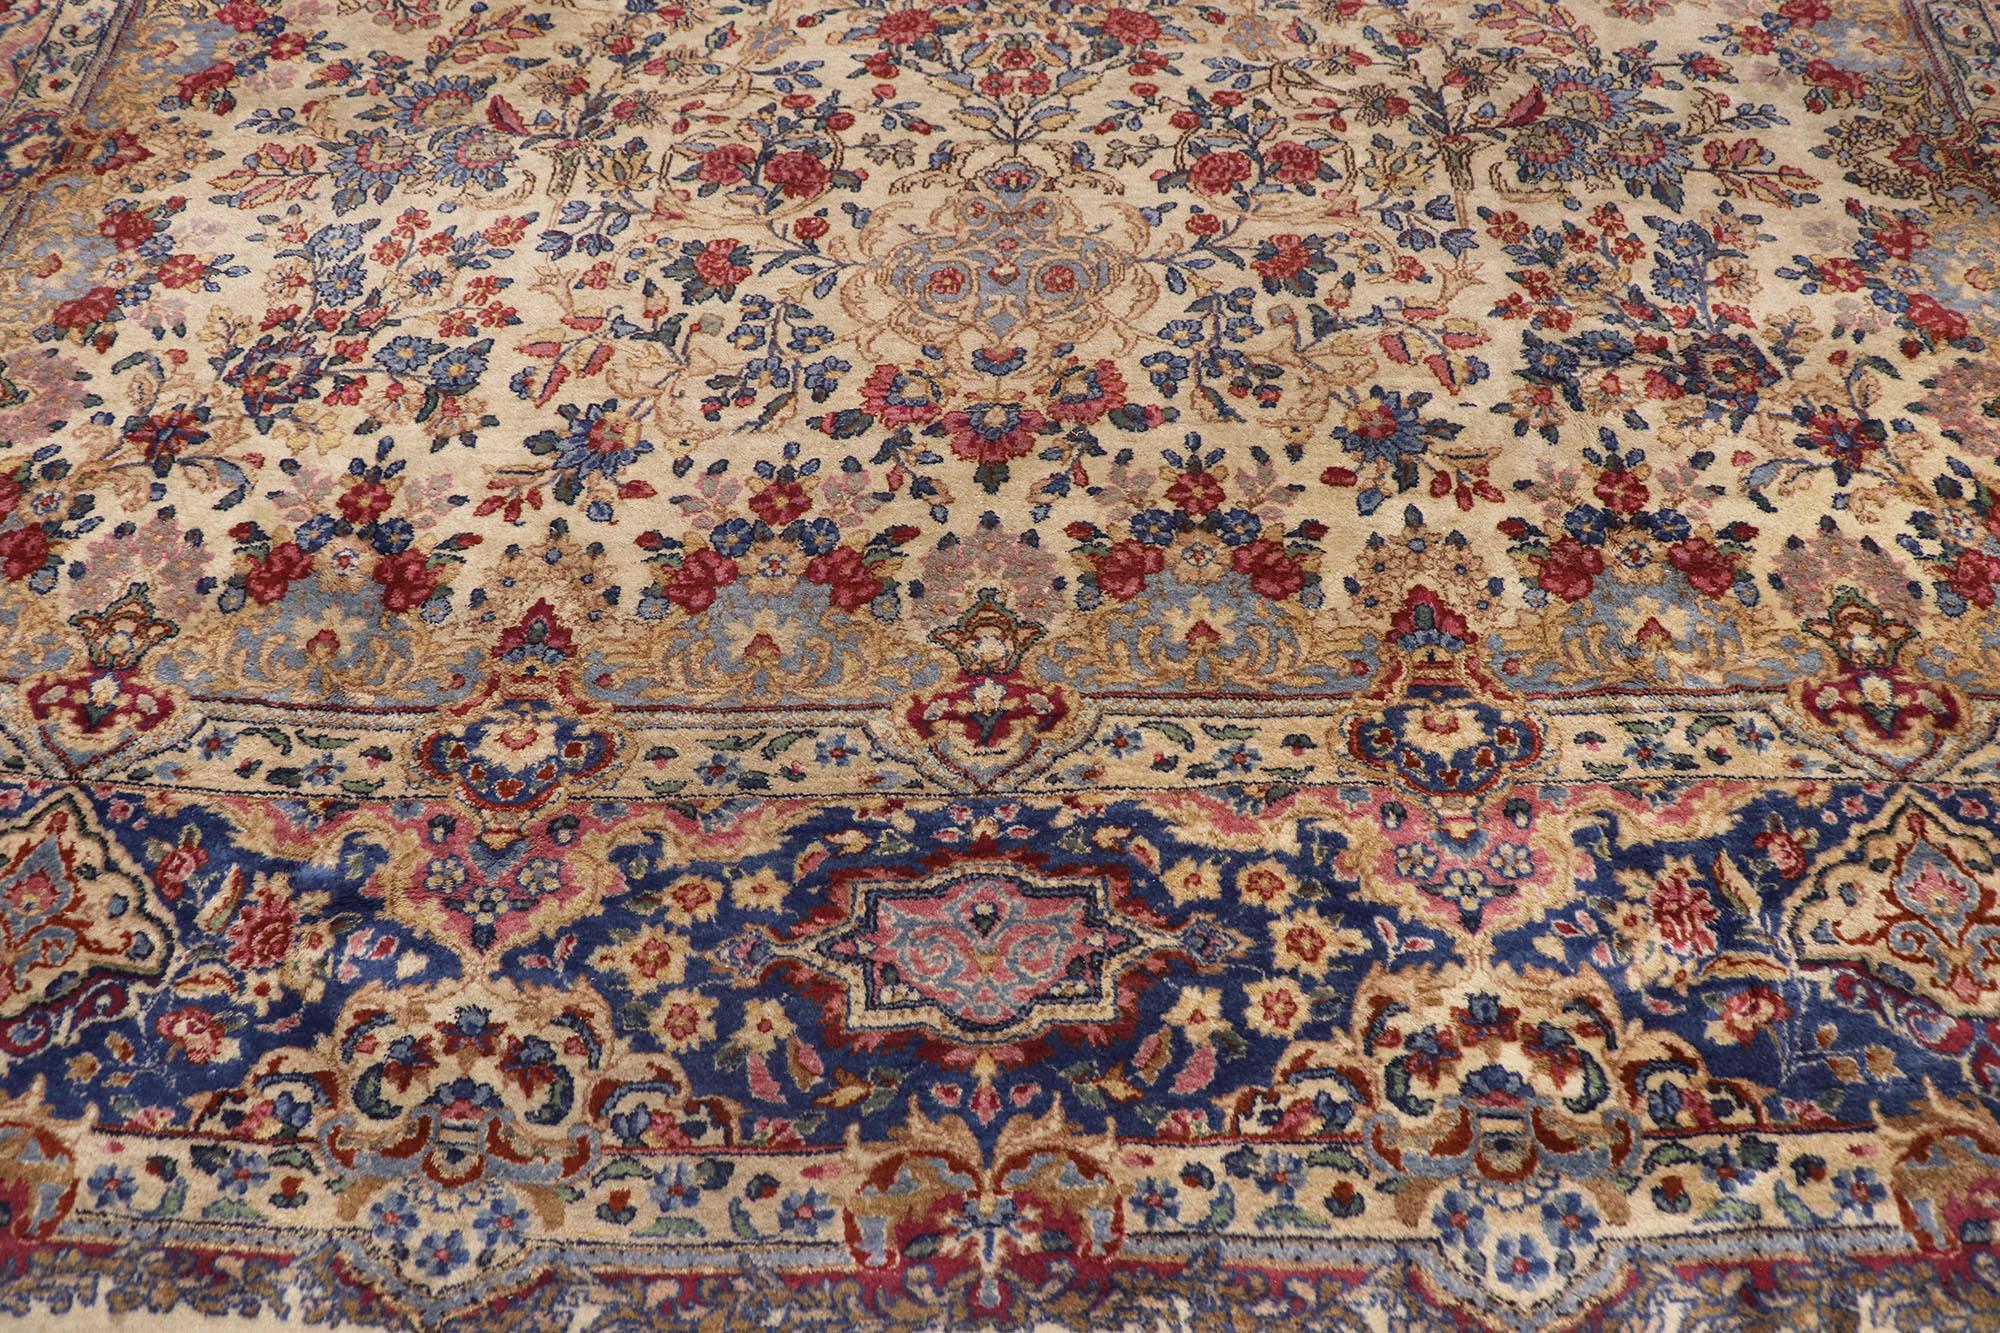 Hand-Knotted Antique Persian Kerman Rug, 09'07 x 17'06 For Sale